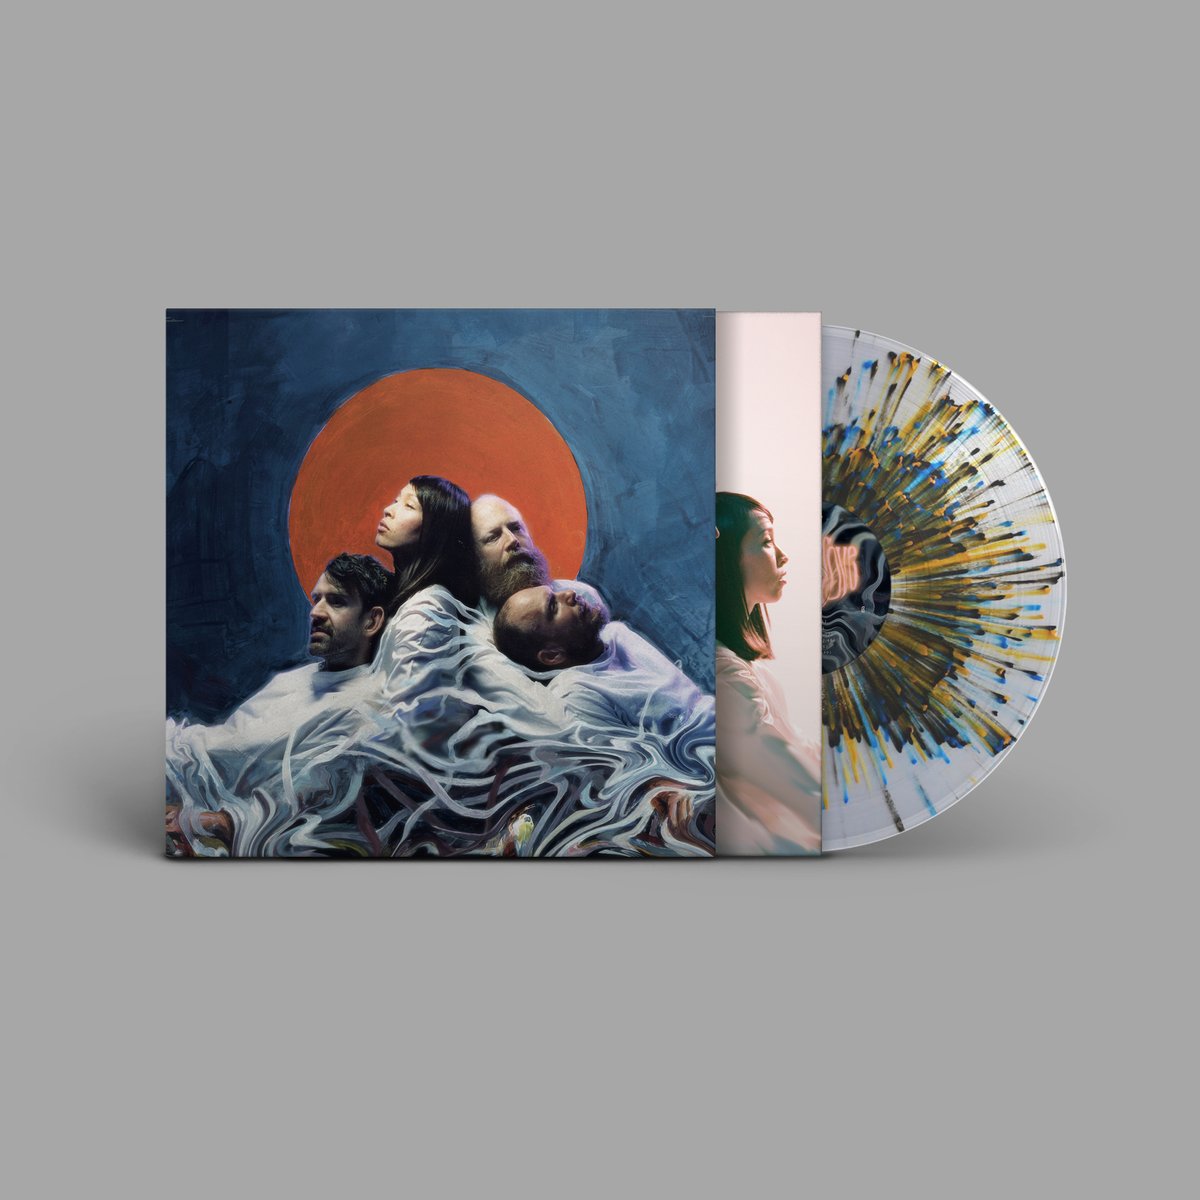 .@LittleDragon's new album 'Slugs of Love' will be available out July 7th via @ninjatune on CD and indie exclusive orange, black & blue splatter vinyl!

Pre-order it here: bit.ly/2oj2Mlu